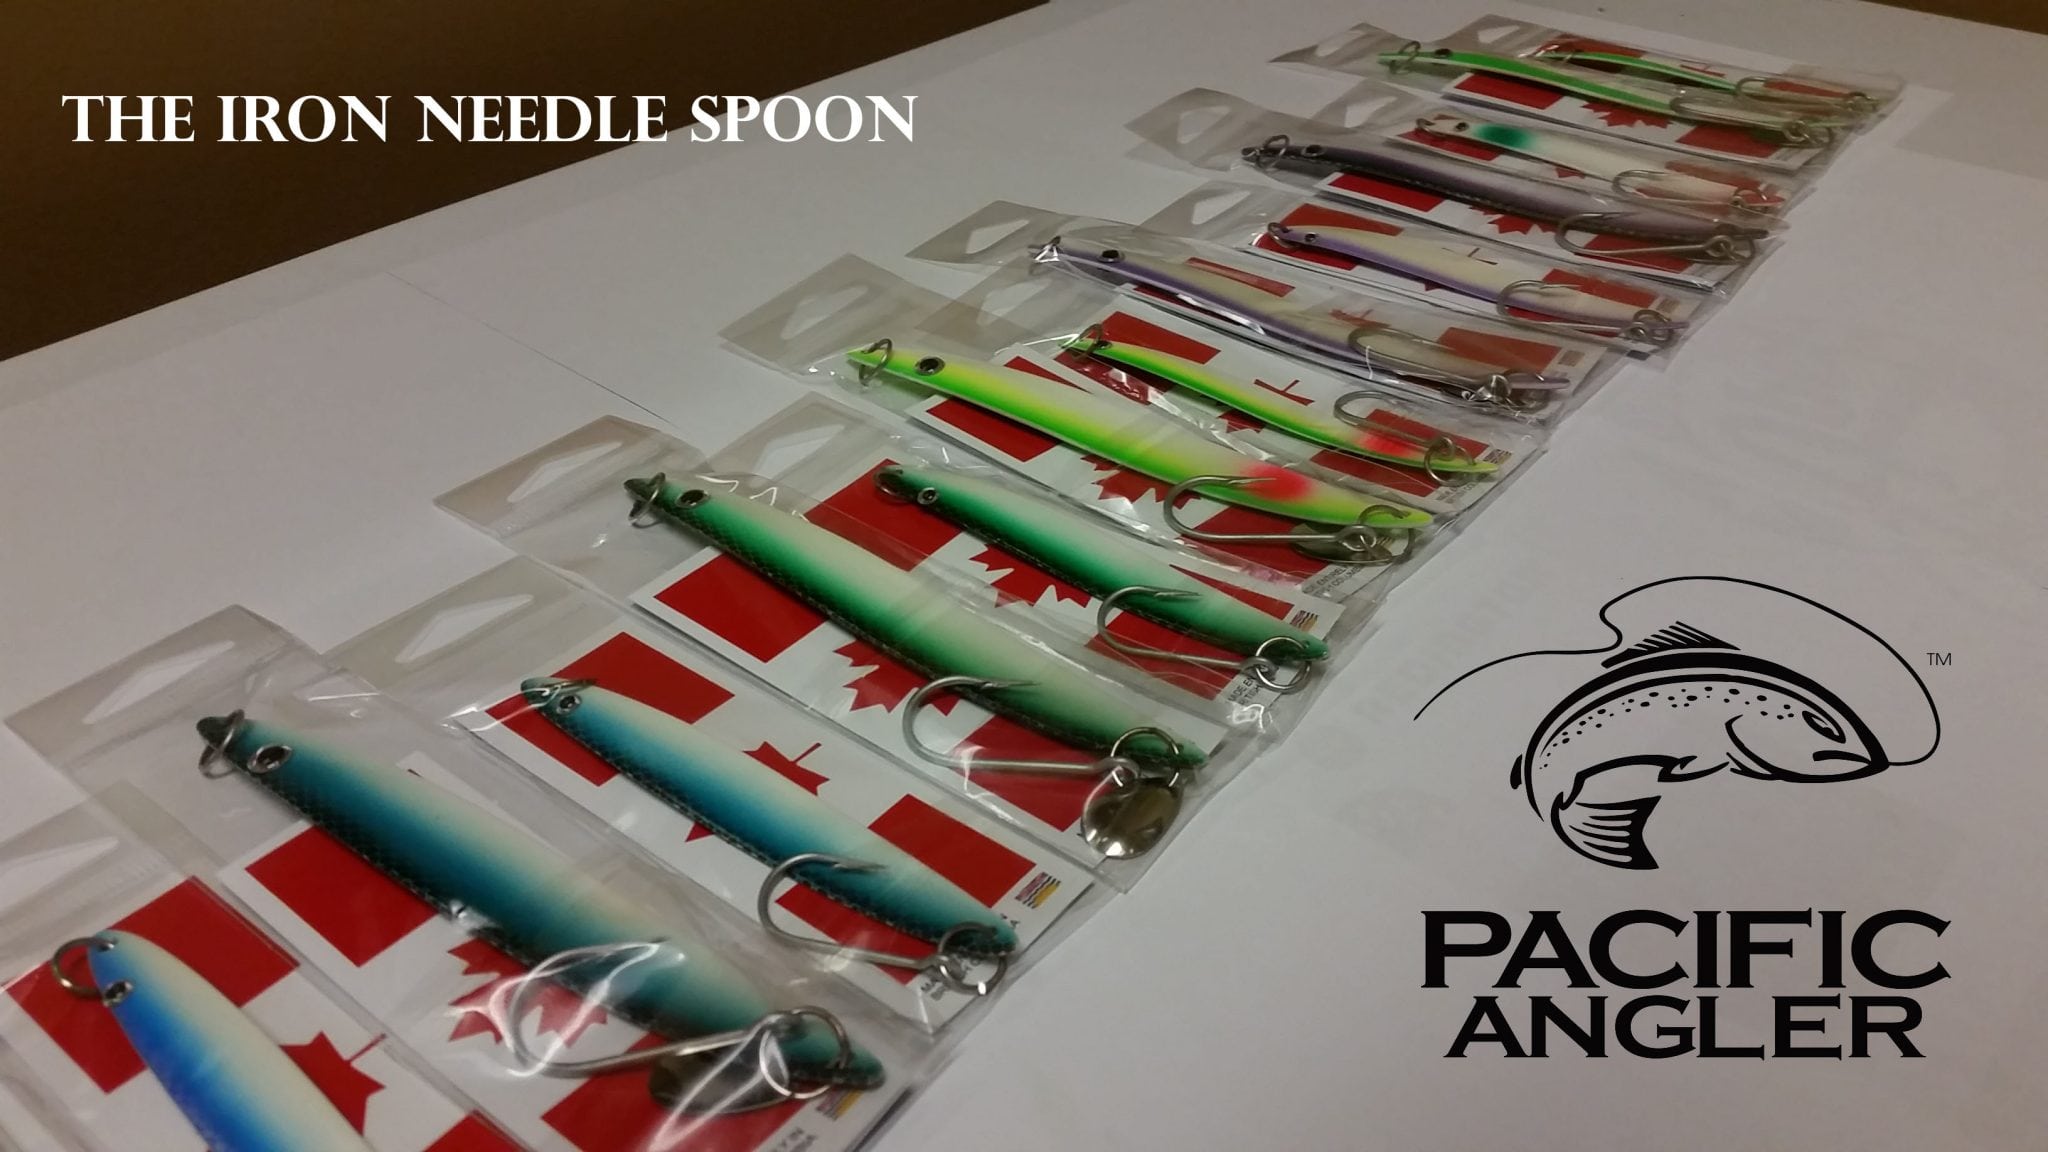 The New Iron Needle Spoons in 4 and 6 inch